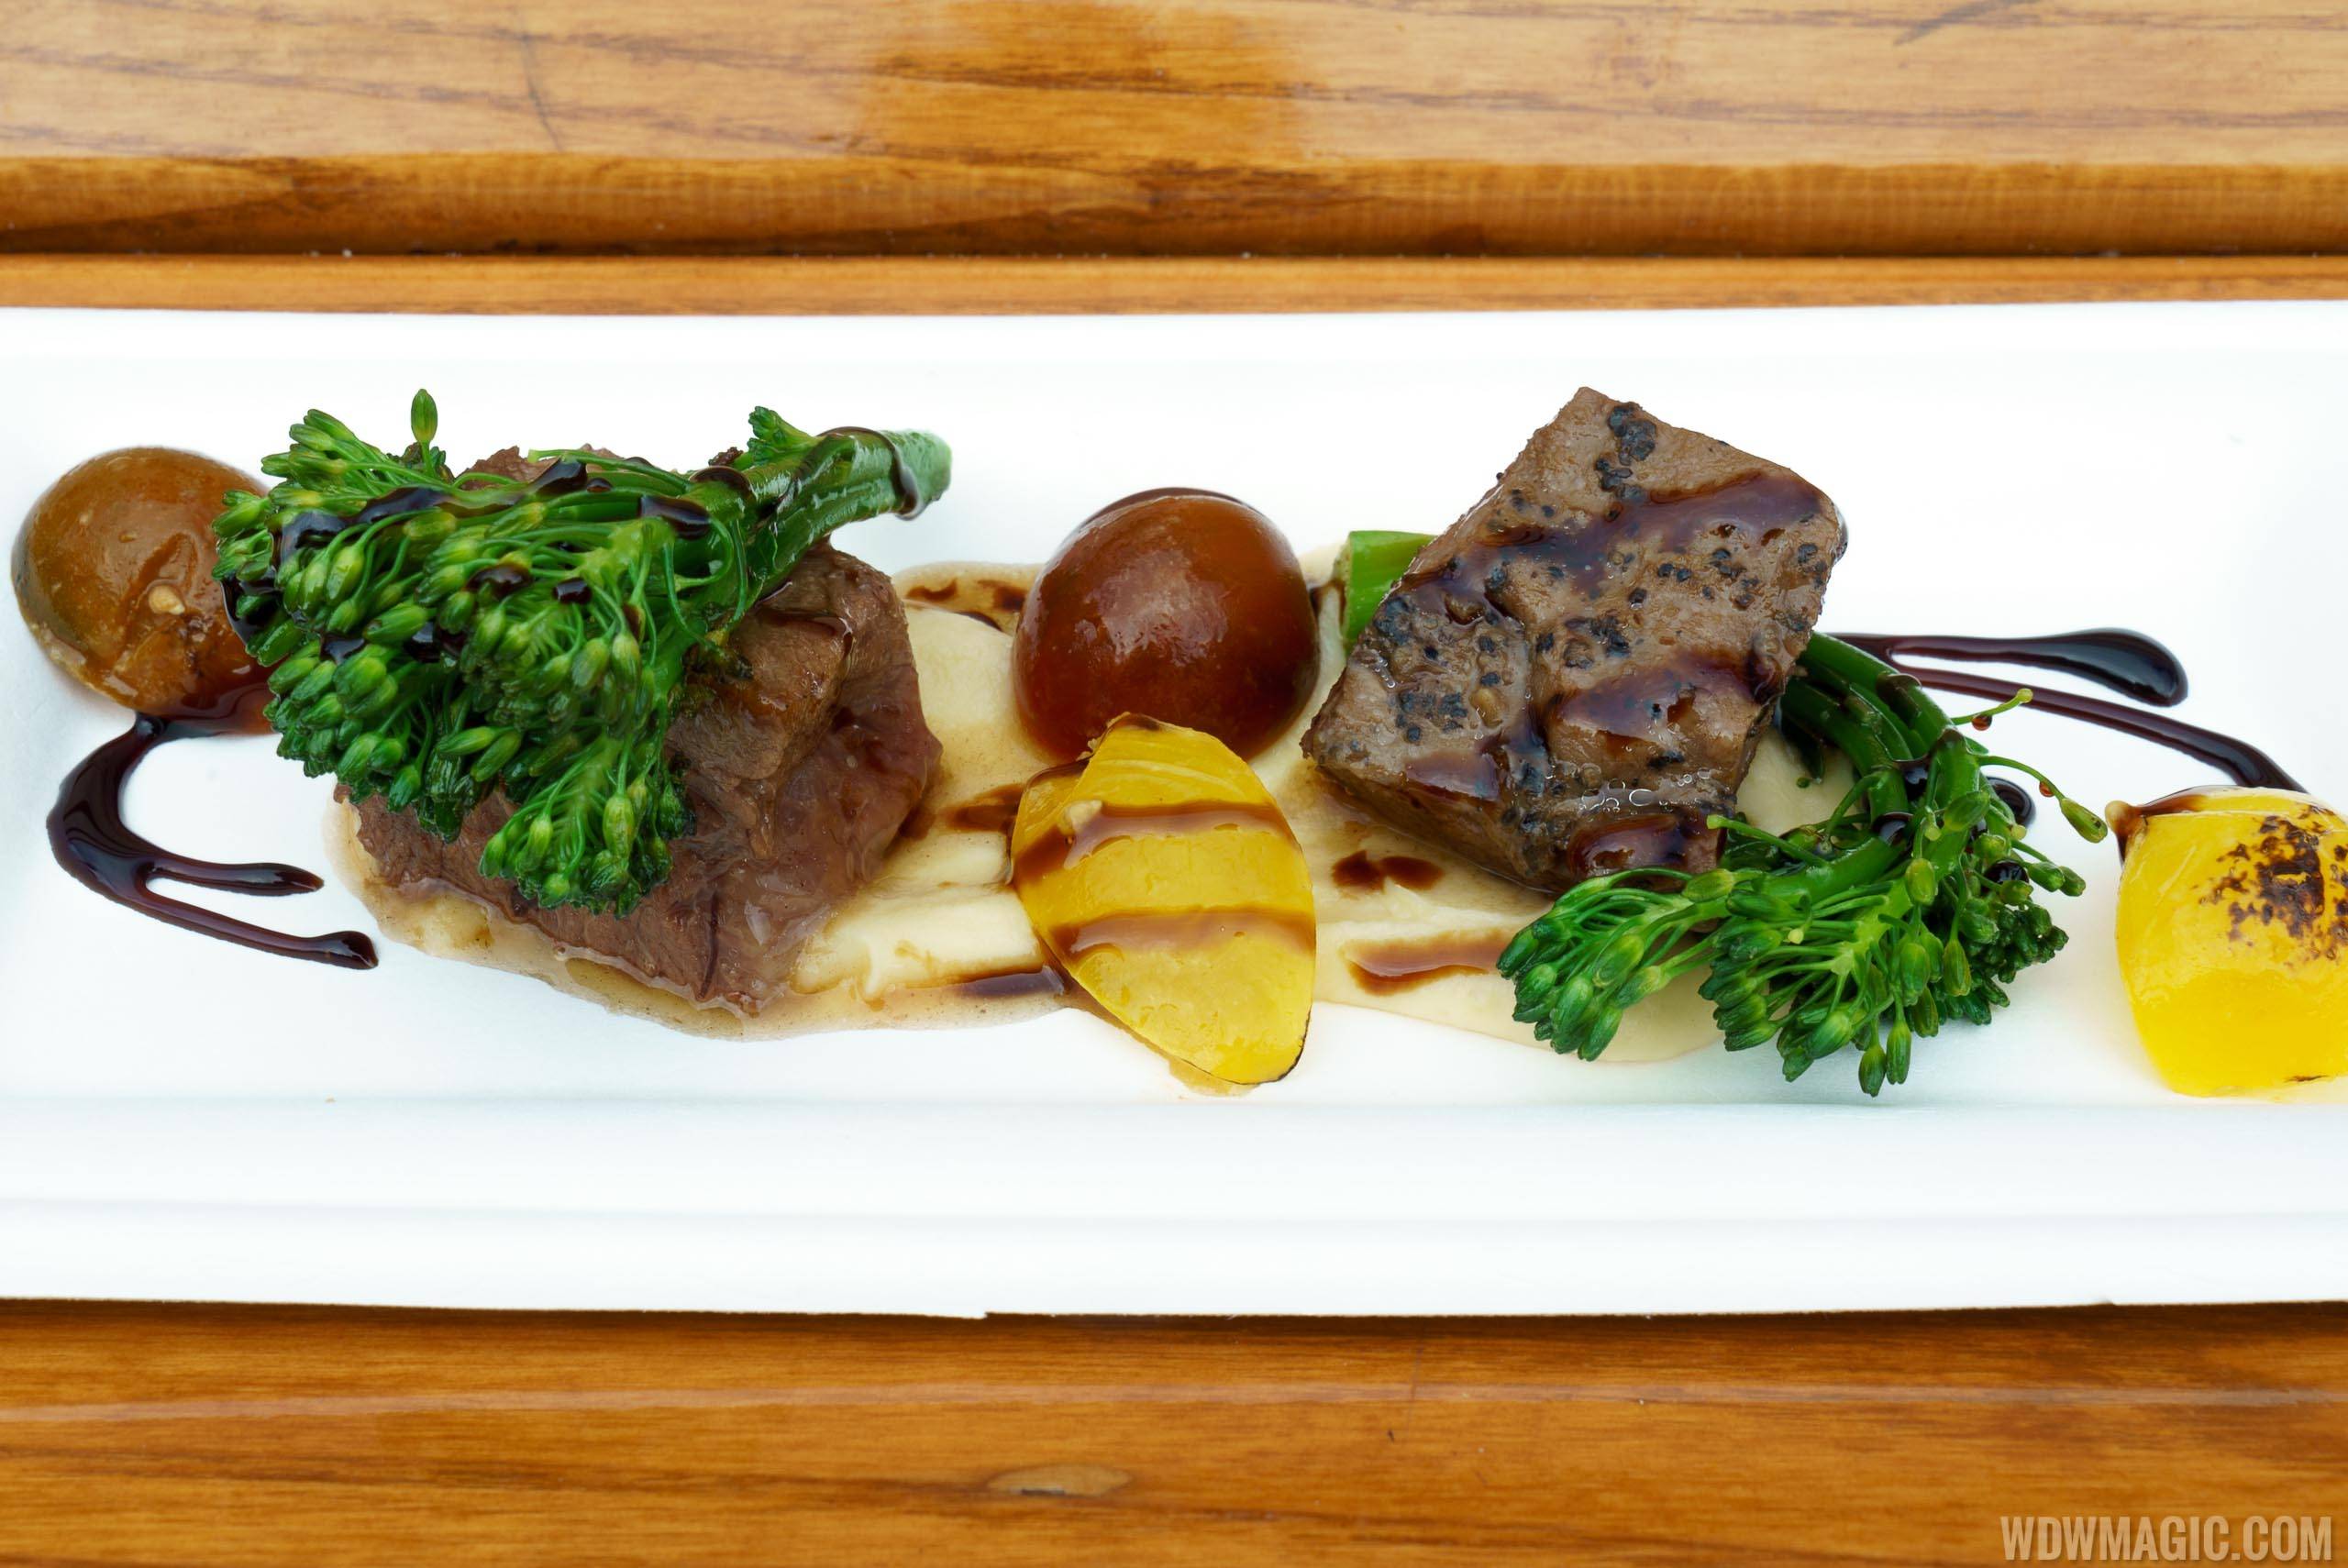 Festival of the Arts Food Studio - Cuisine Classique - Braised Short Rib with Parsnip Purée, Broccolini, Baby Tomatoes and Aged Balsamic